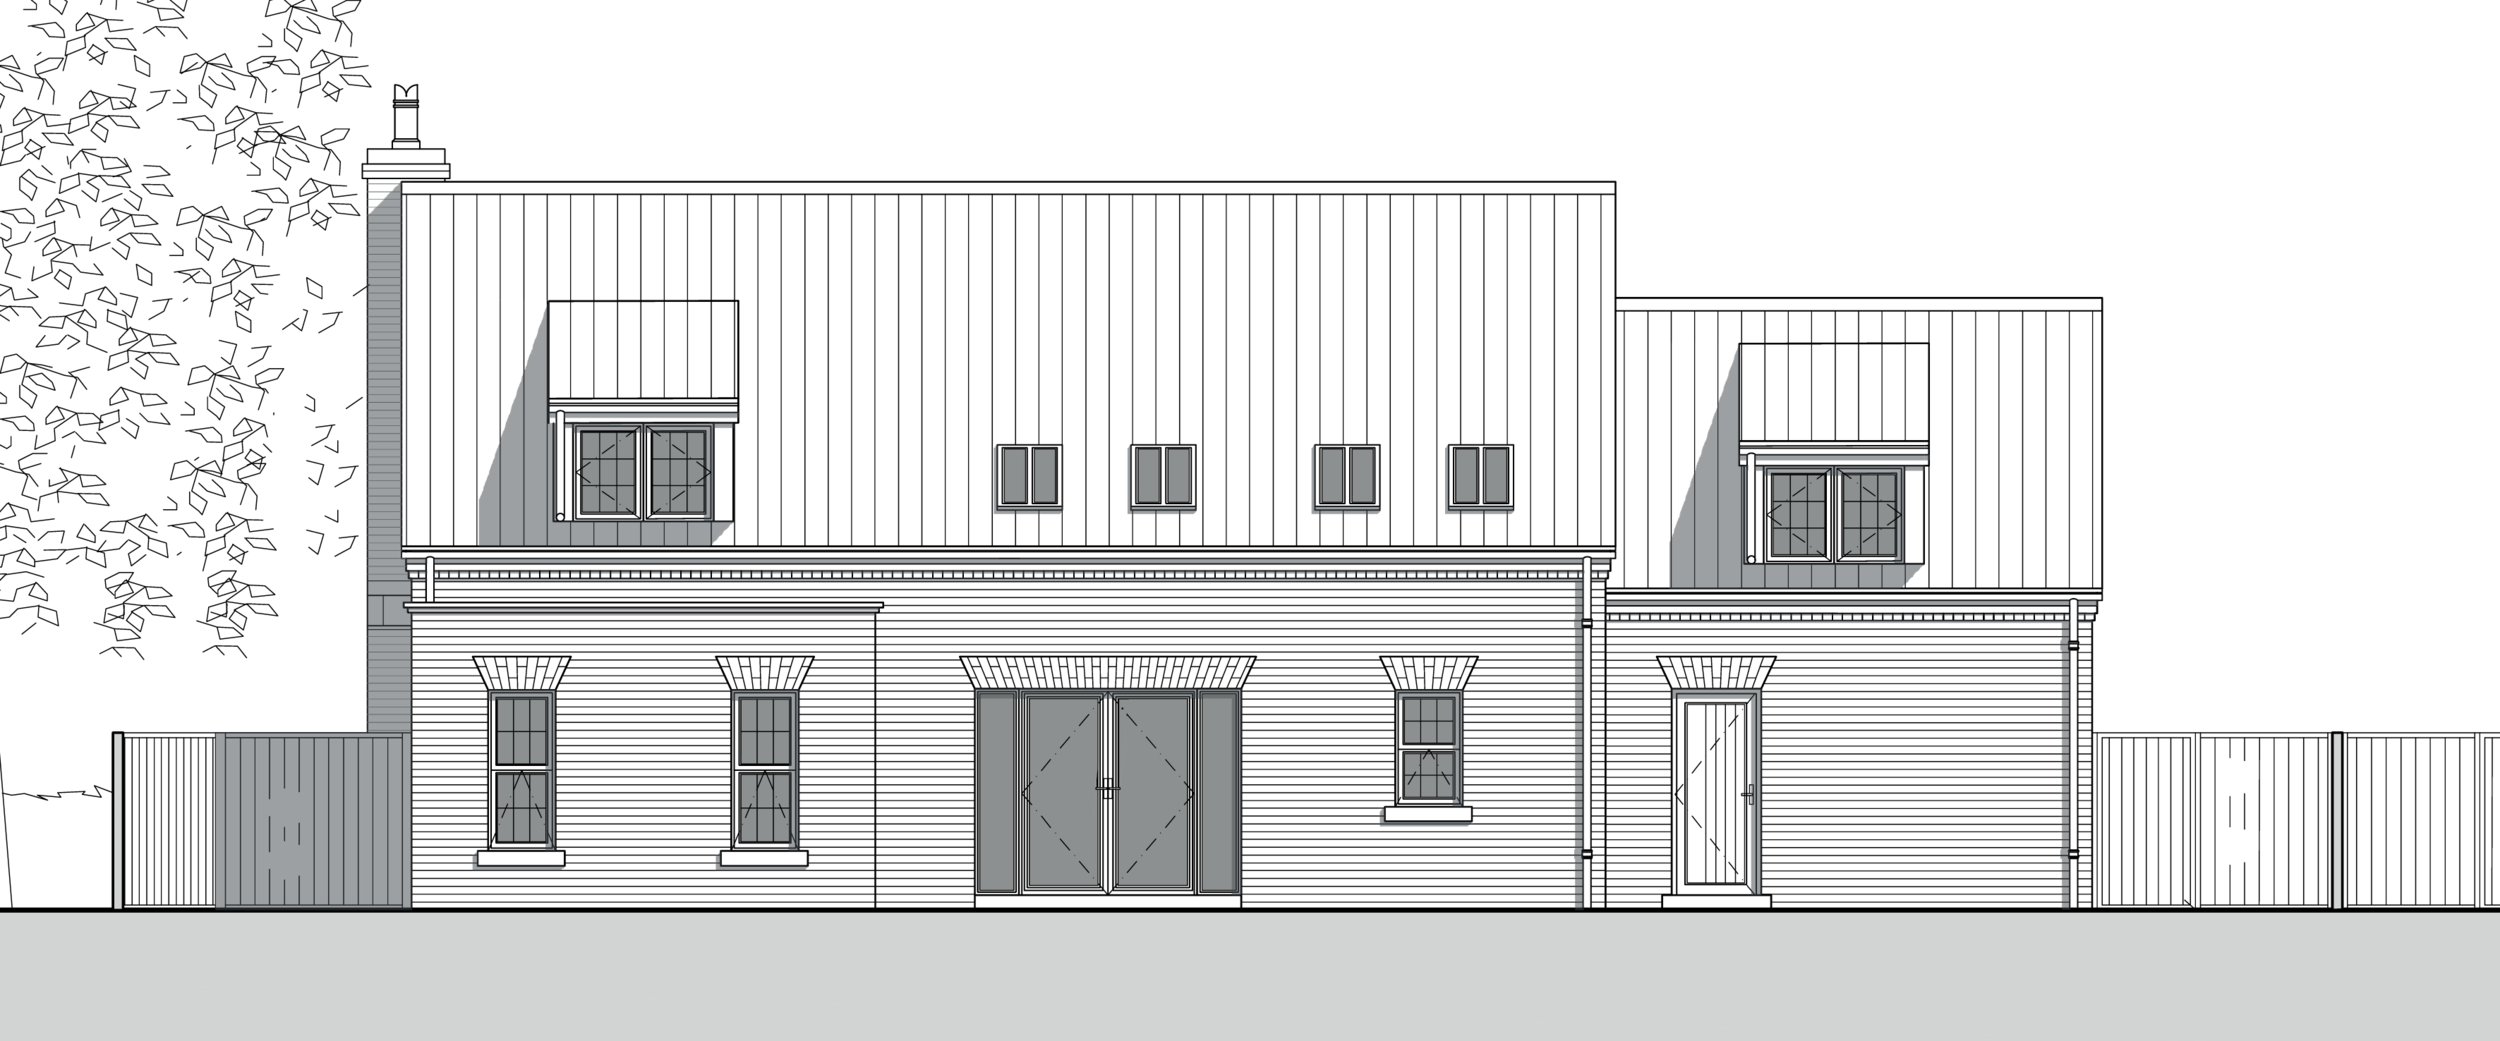 tockwith_elevations_field_house2.png